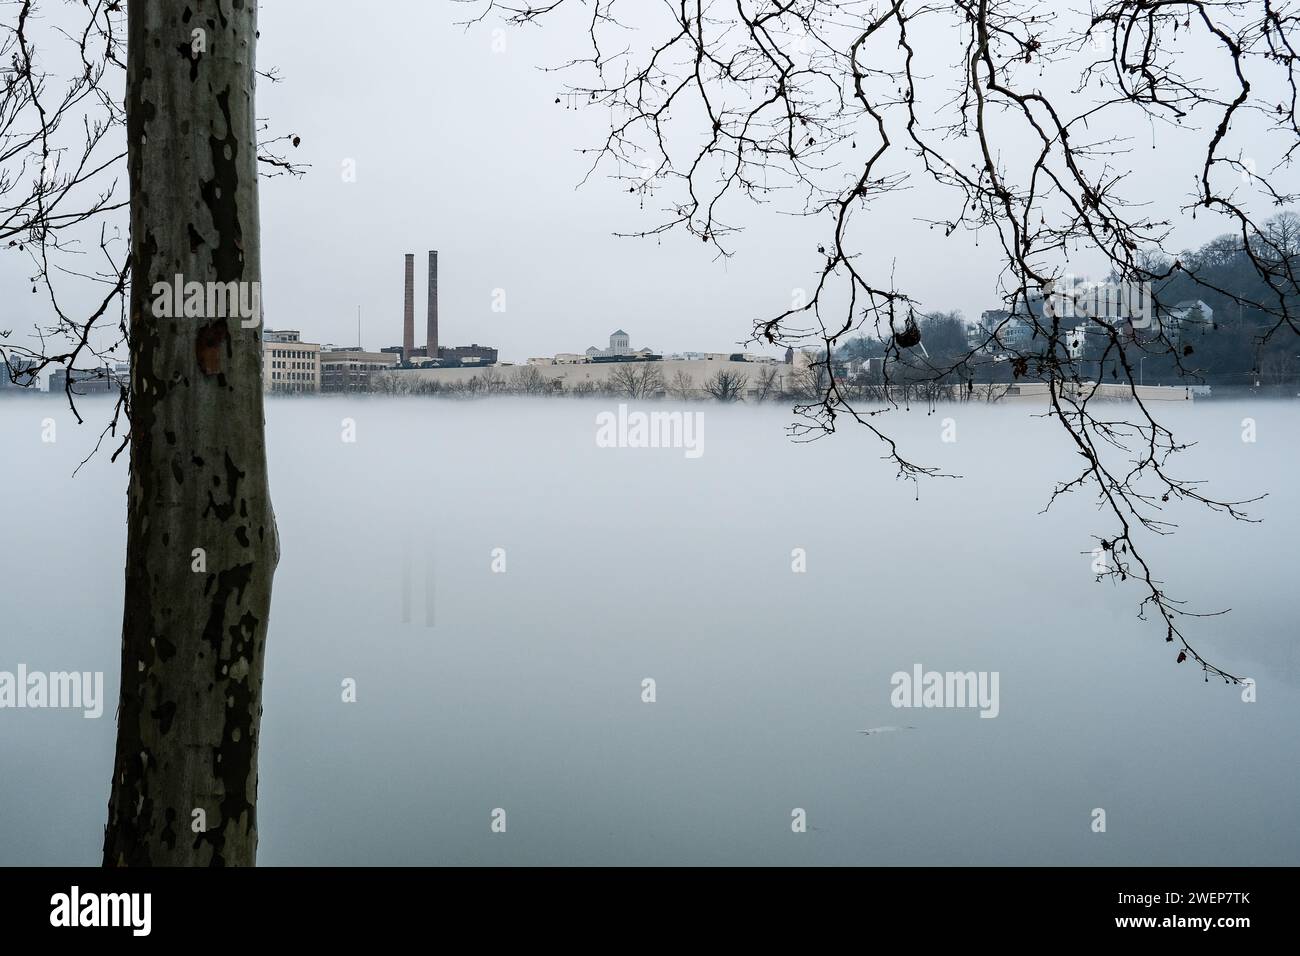 Morning fog on the Allegheny River. The Heinz smokestacks are visible in the background. Stock Photo